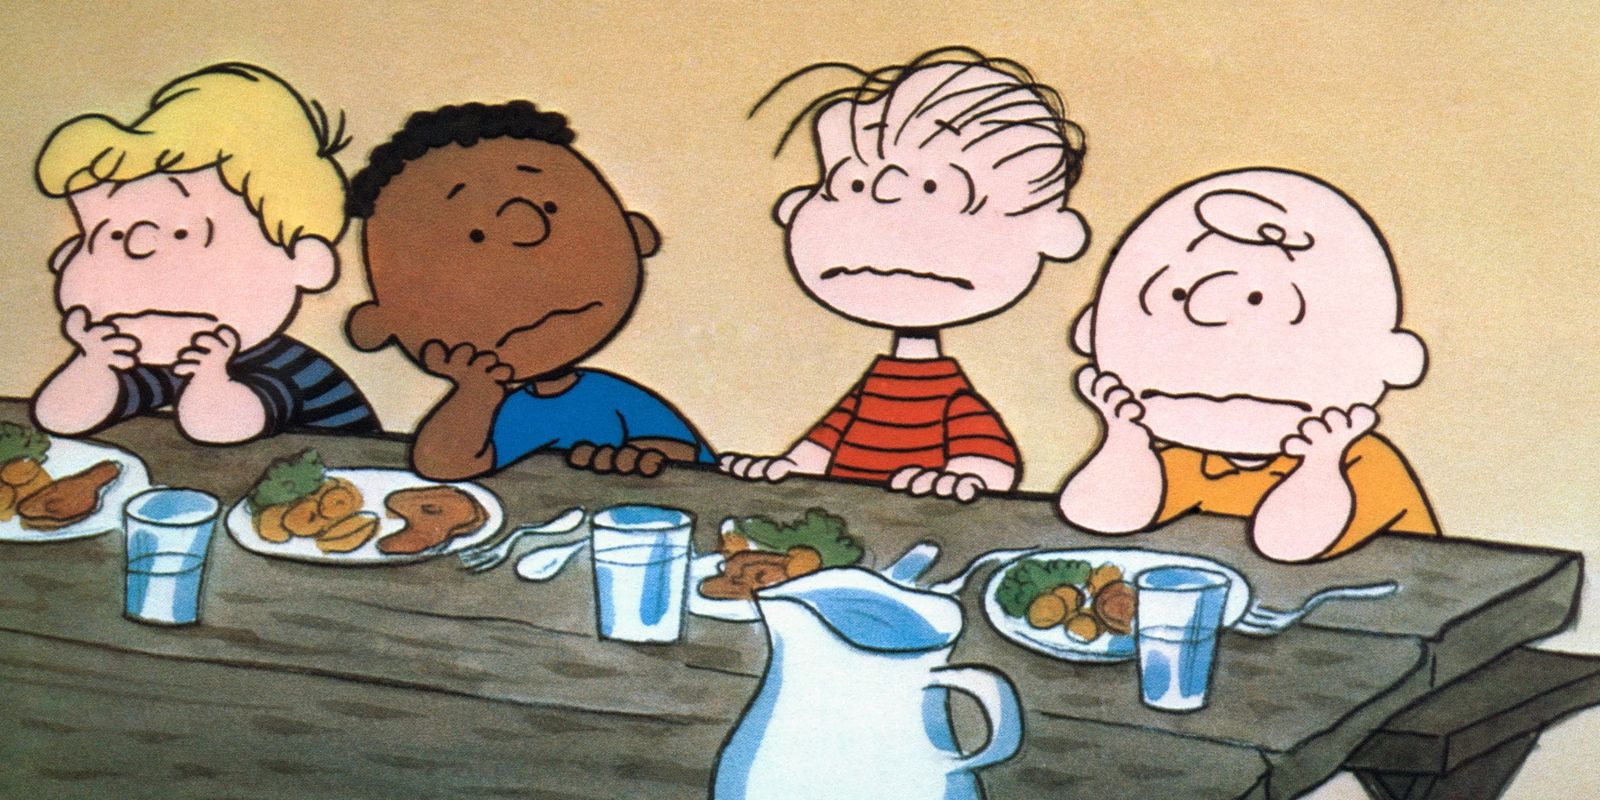 Peanuts kids sitting at a wooden table with food on plates in front of them.